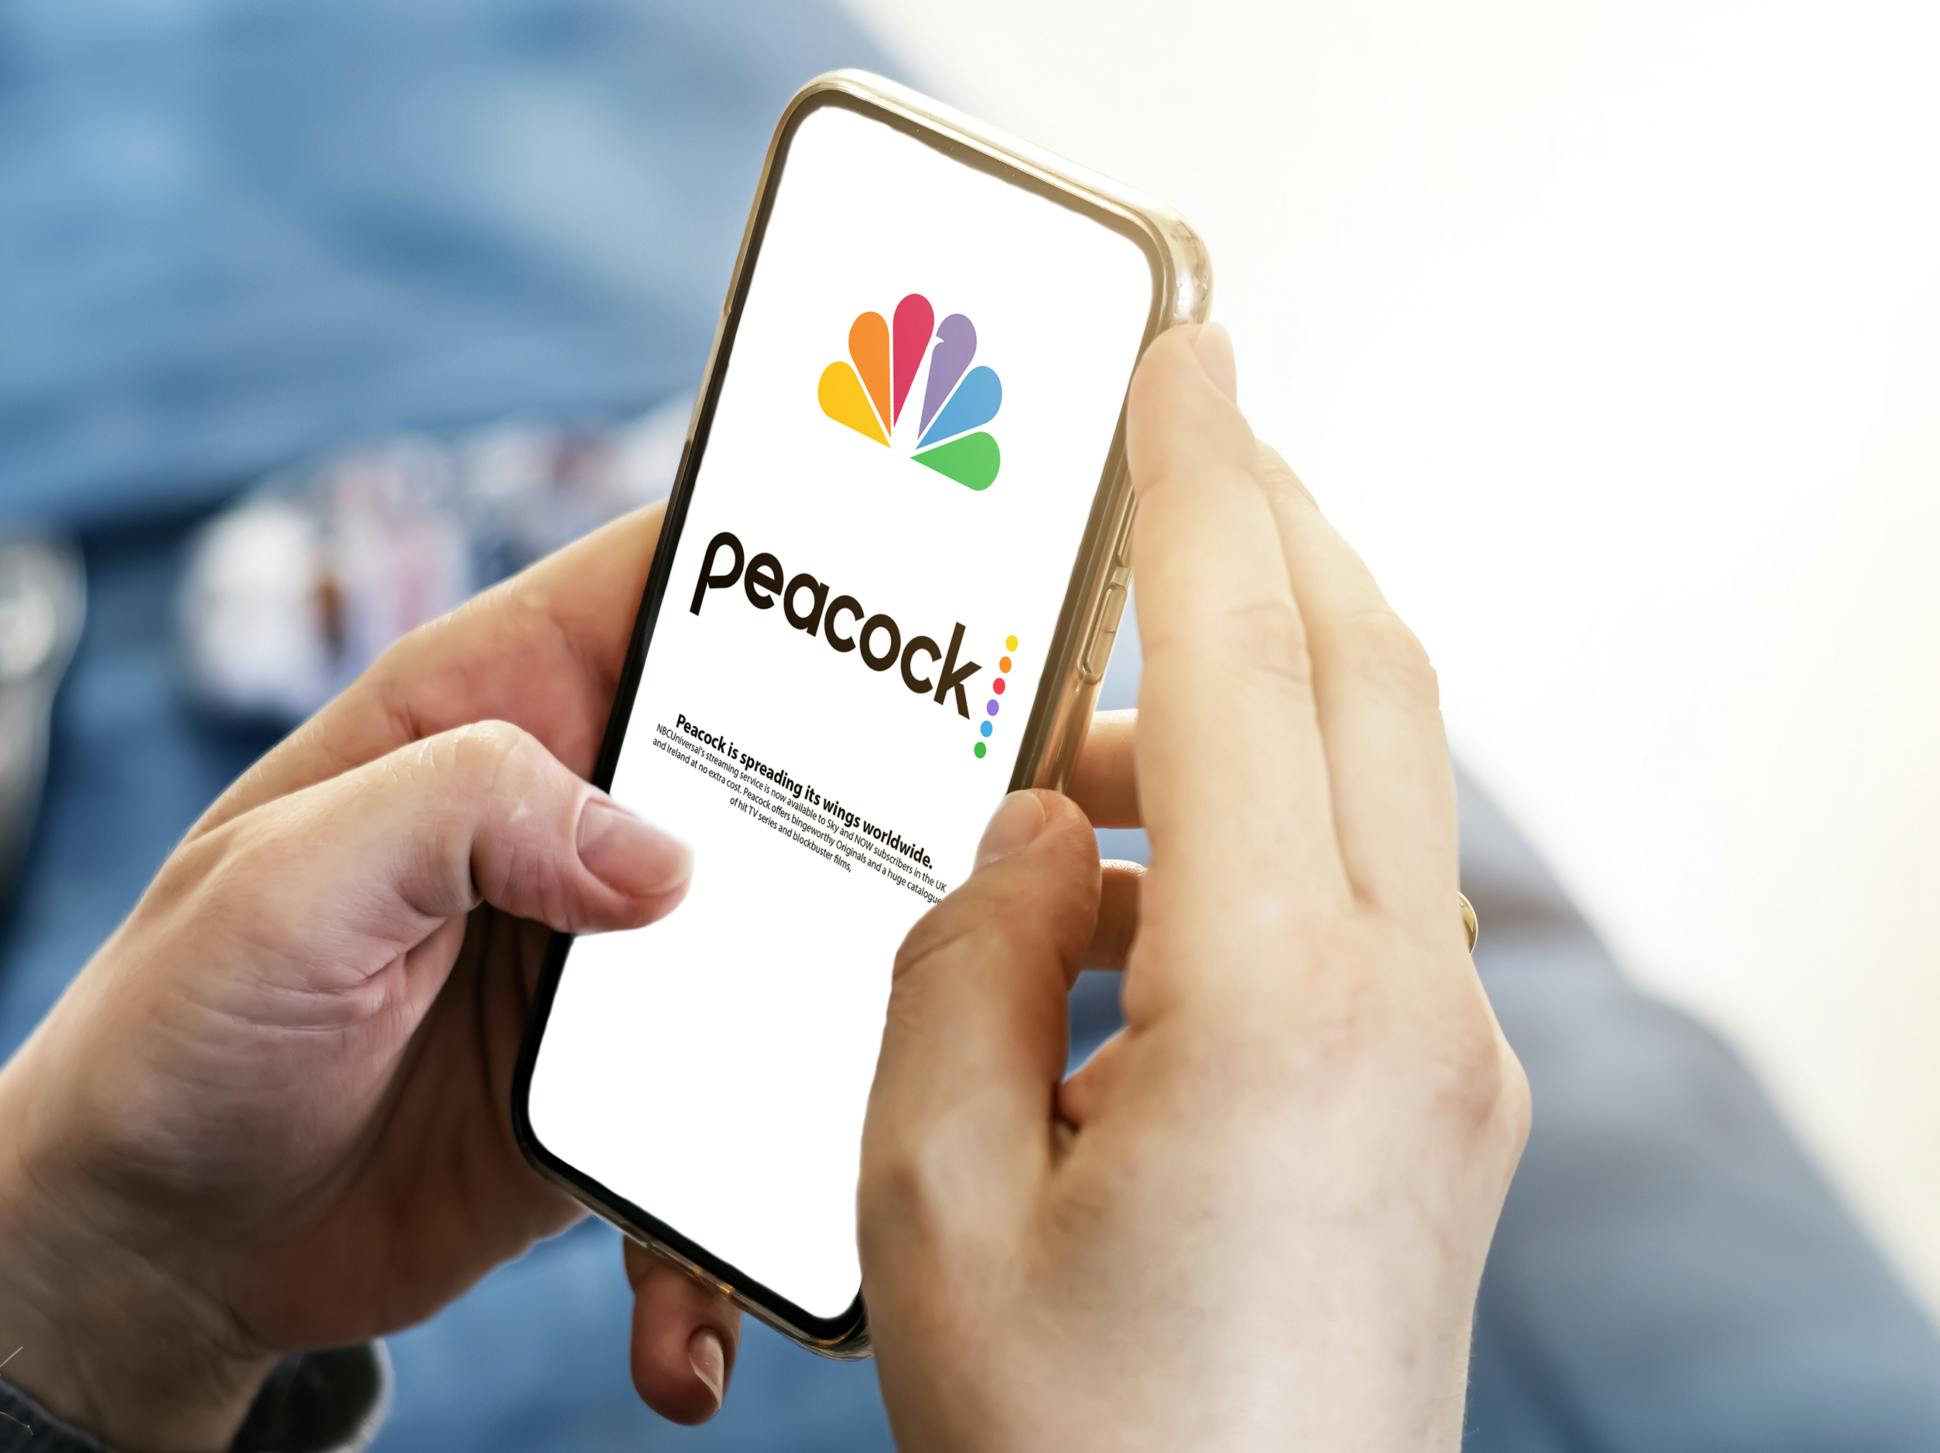 Is Peacock TV Free? Heres How to Make the Most of Your Subscription